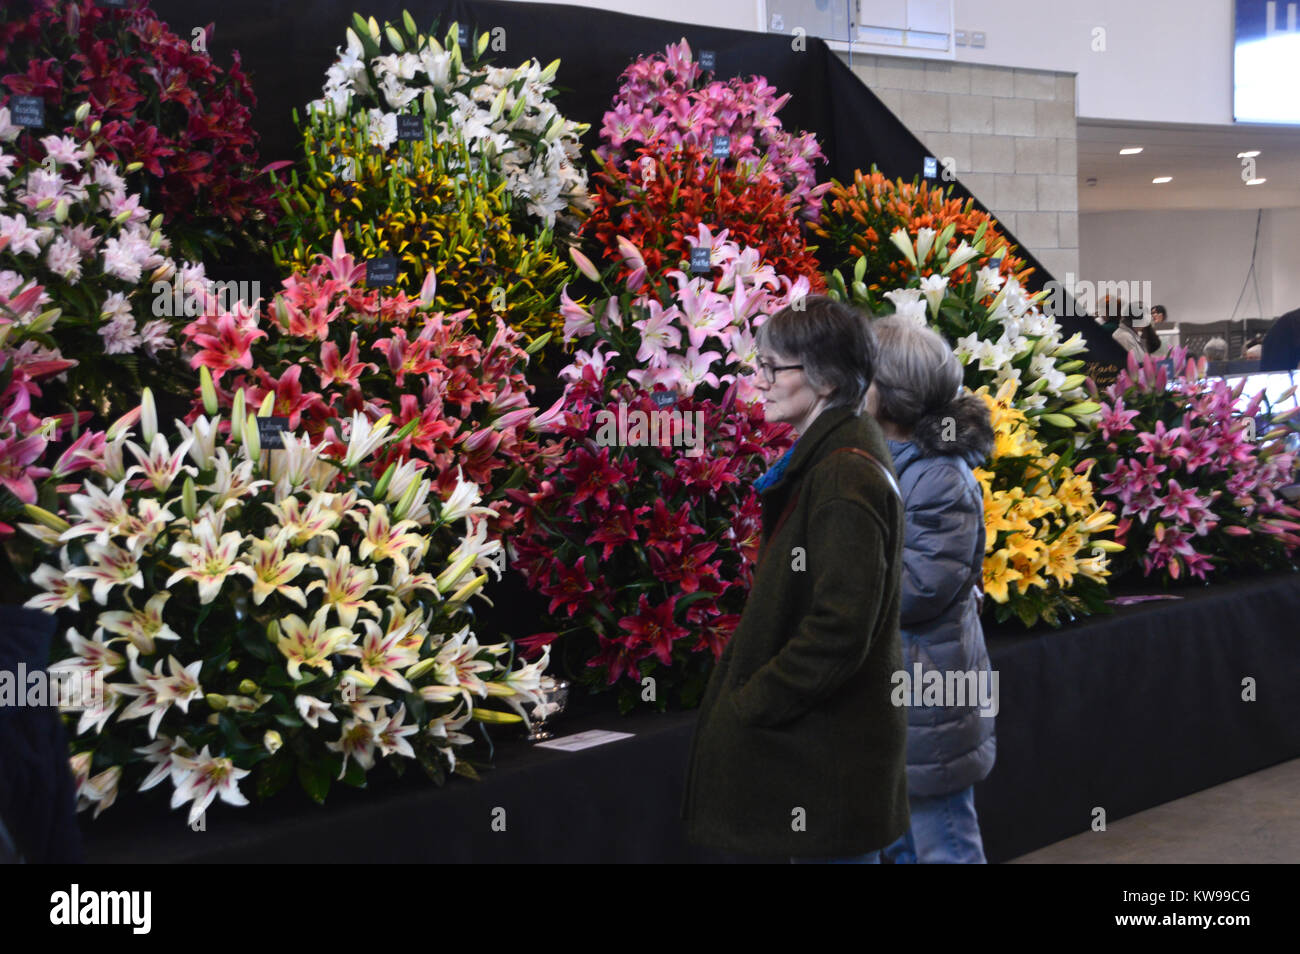 Two Woman Looking at a Colourful Display of Lilies at the Harrogate Spring Show. Yorkshire, England, UK. Stock Photo